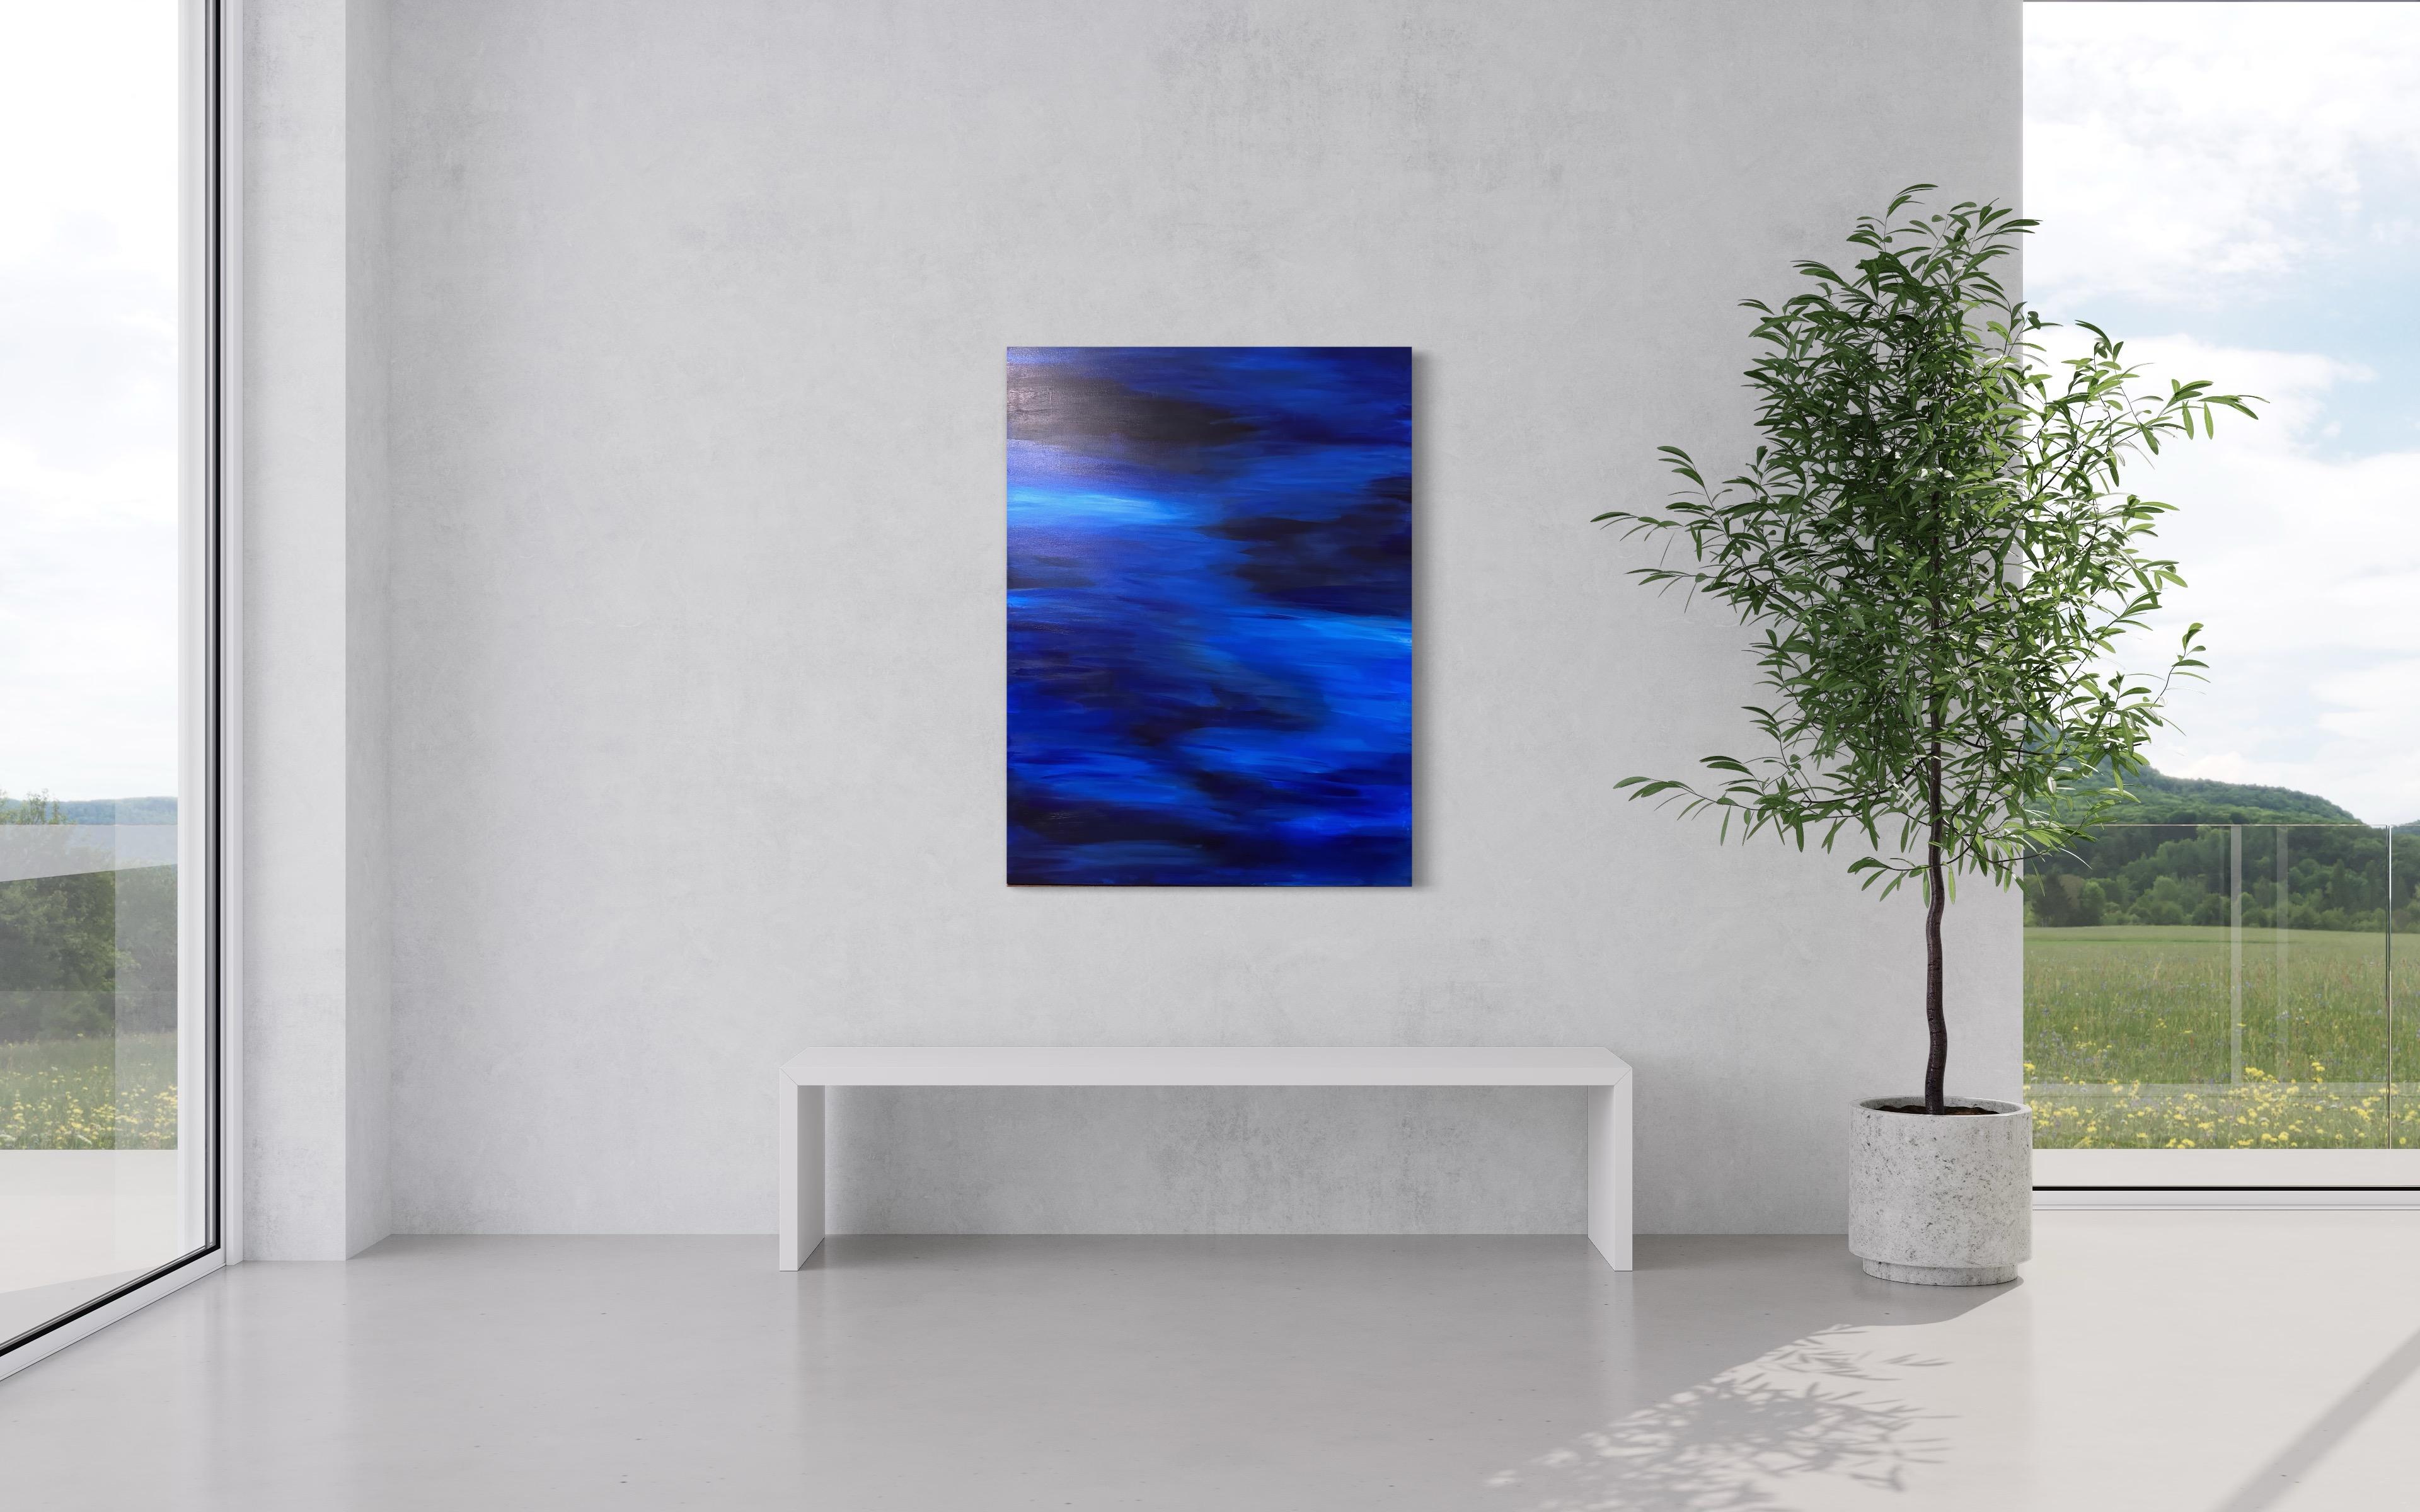 Kimberly Marney
Night Moves (Blue, Abstract, Water, Seascape)
2023
Acrylic on Canvas
Size: 48x36x1.5in
Signed by hand
COA provided
Ref.: 924802-2010

Tags: Blue, Abstract, Water, Seascape

Layers of blues blend to create an abstracted